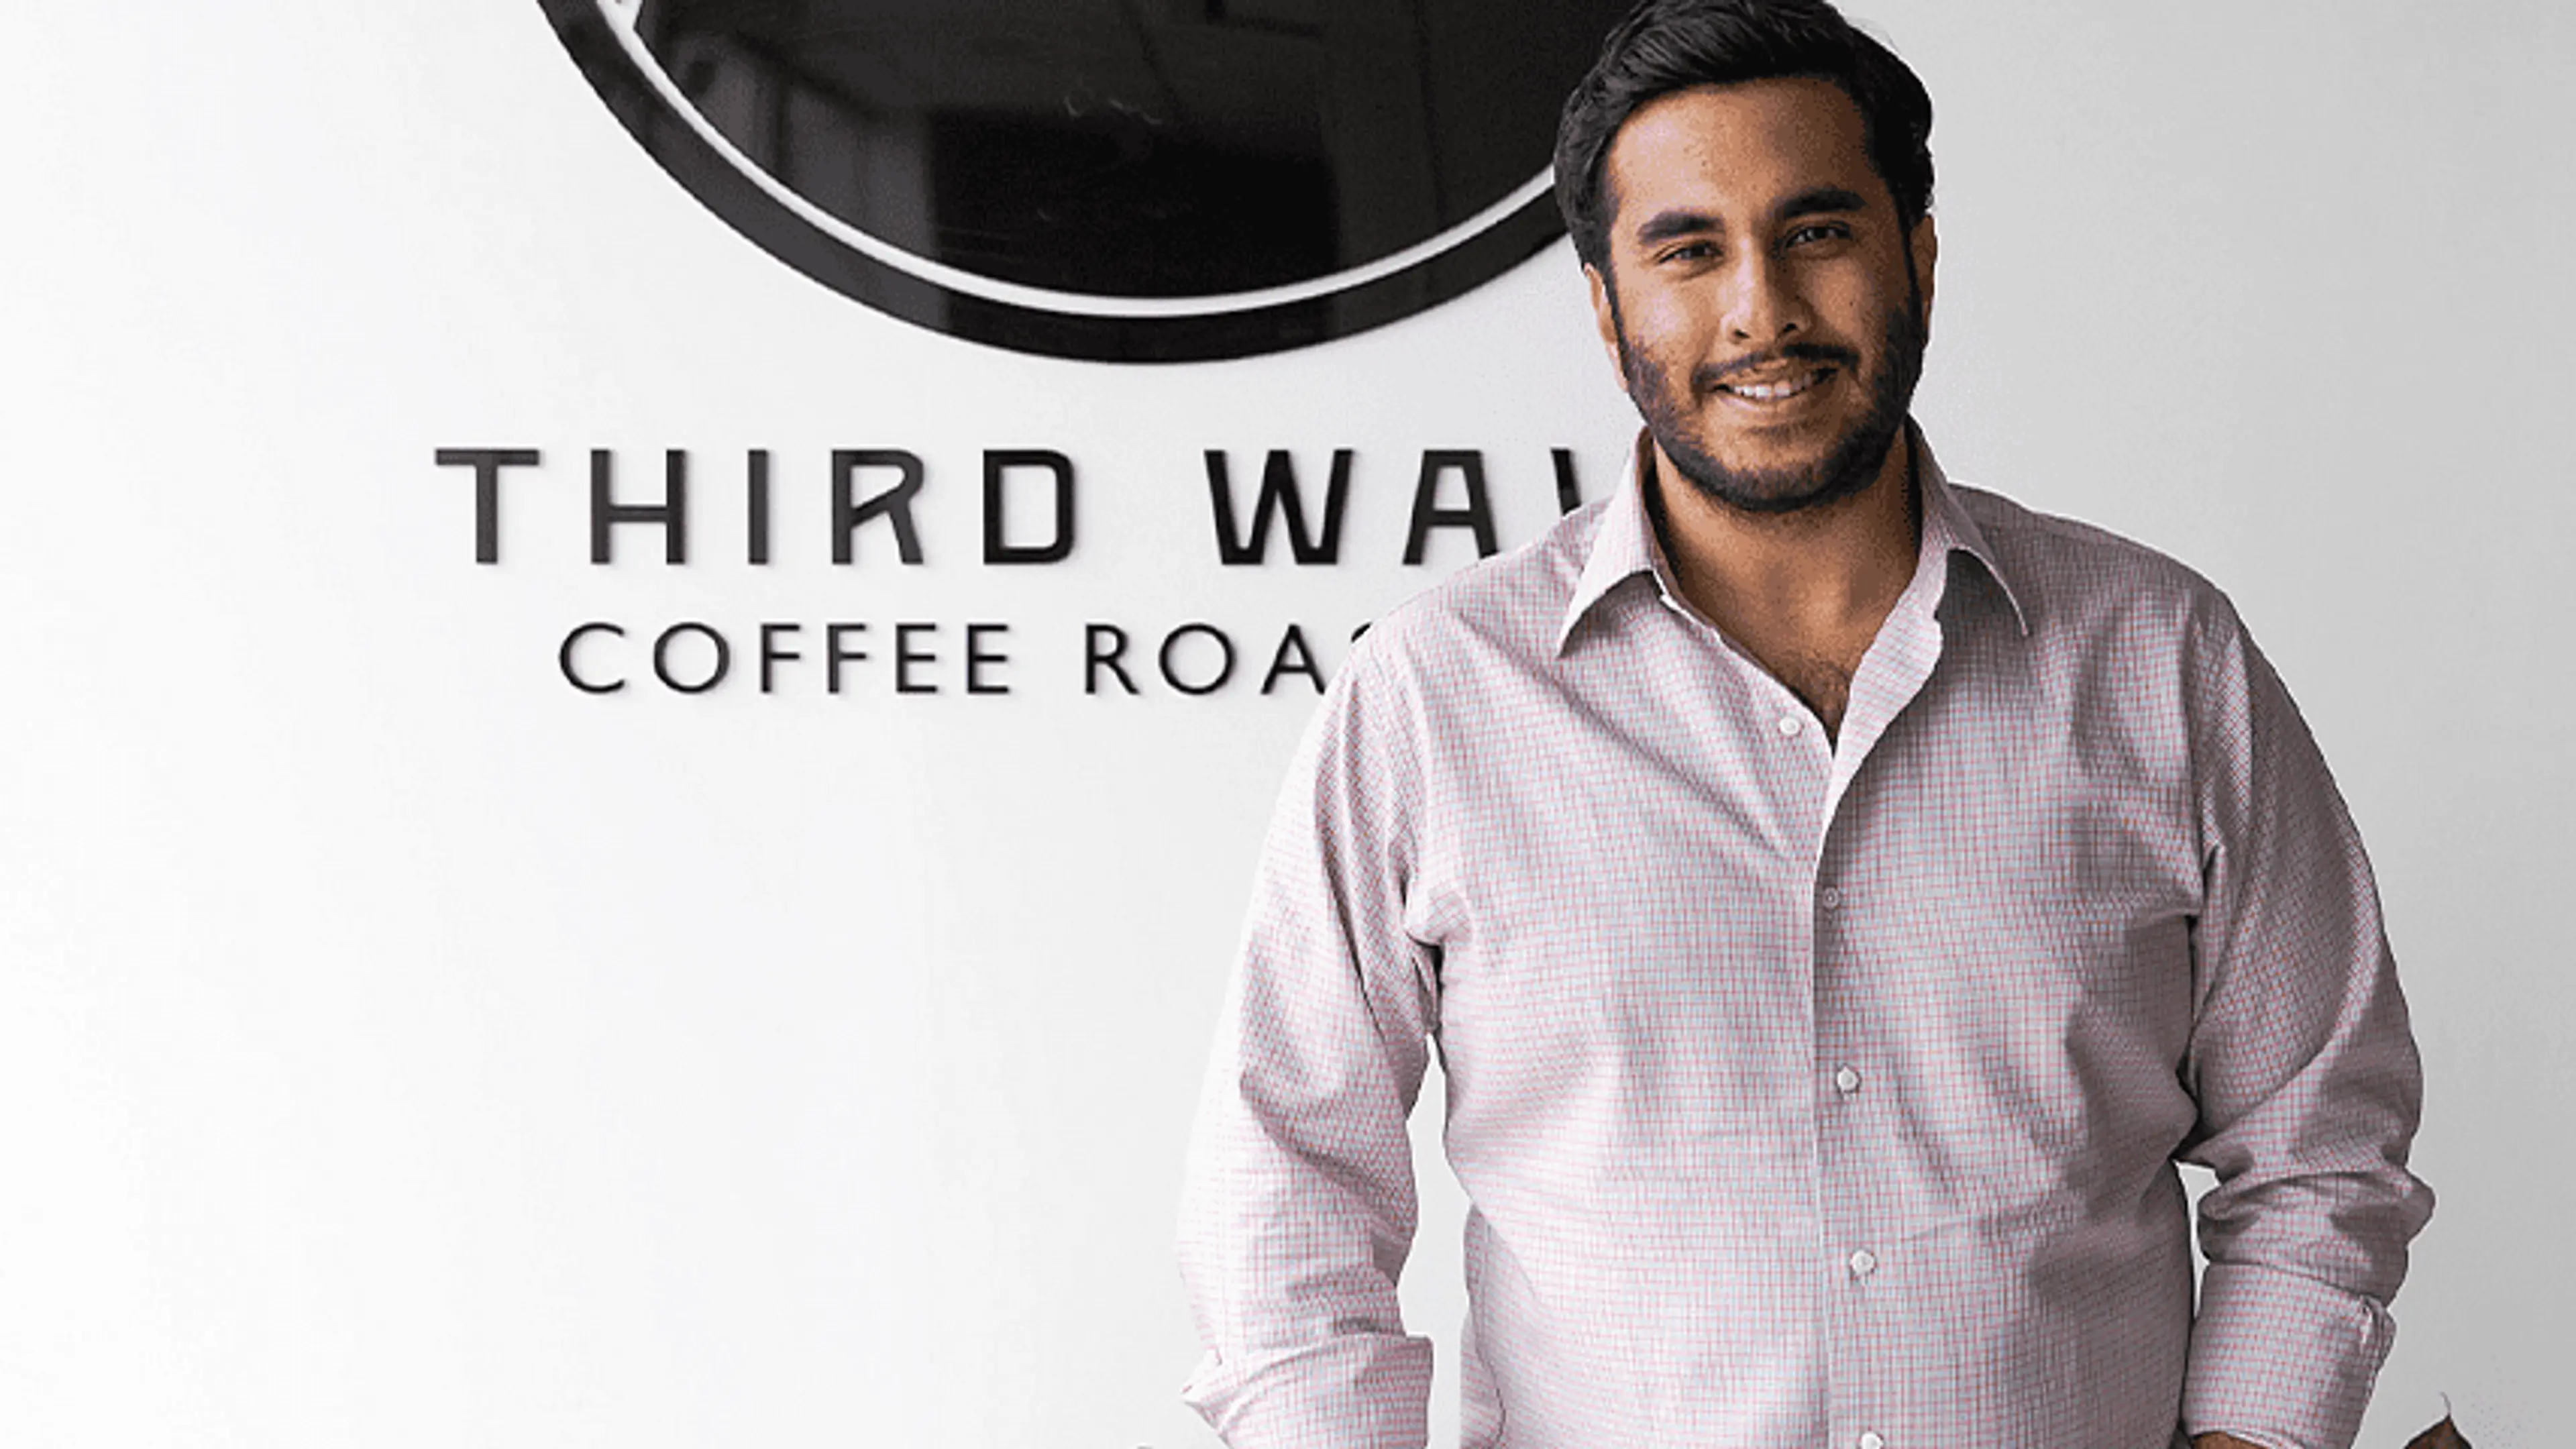 Third Wave Coffee appoints ex-KFC executive Rajat Luthra as new CEO; Sushant Goel moves to Board